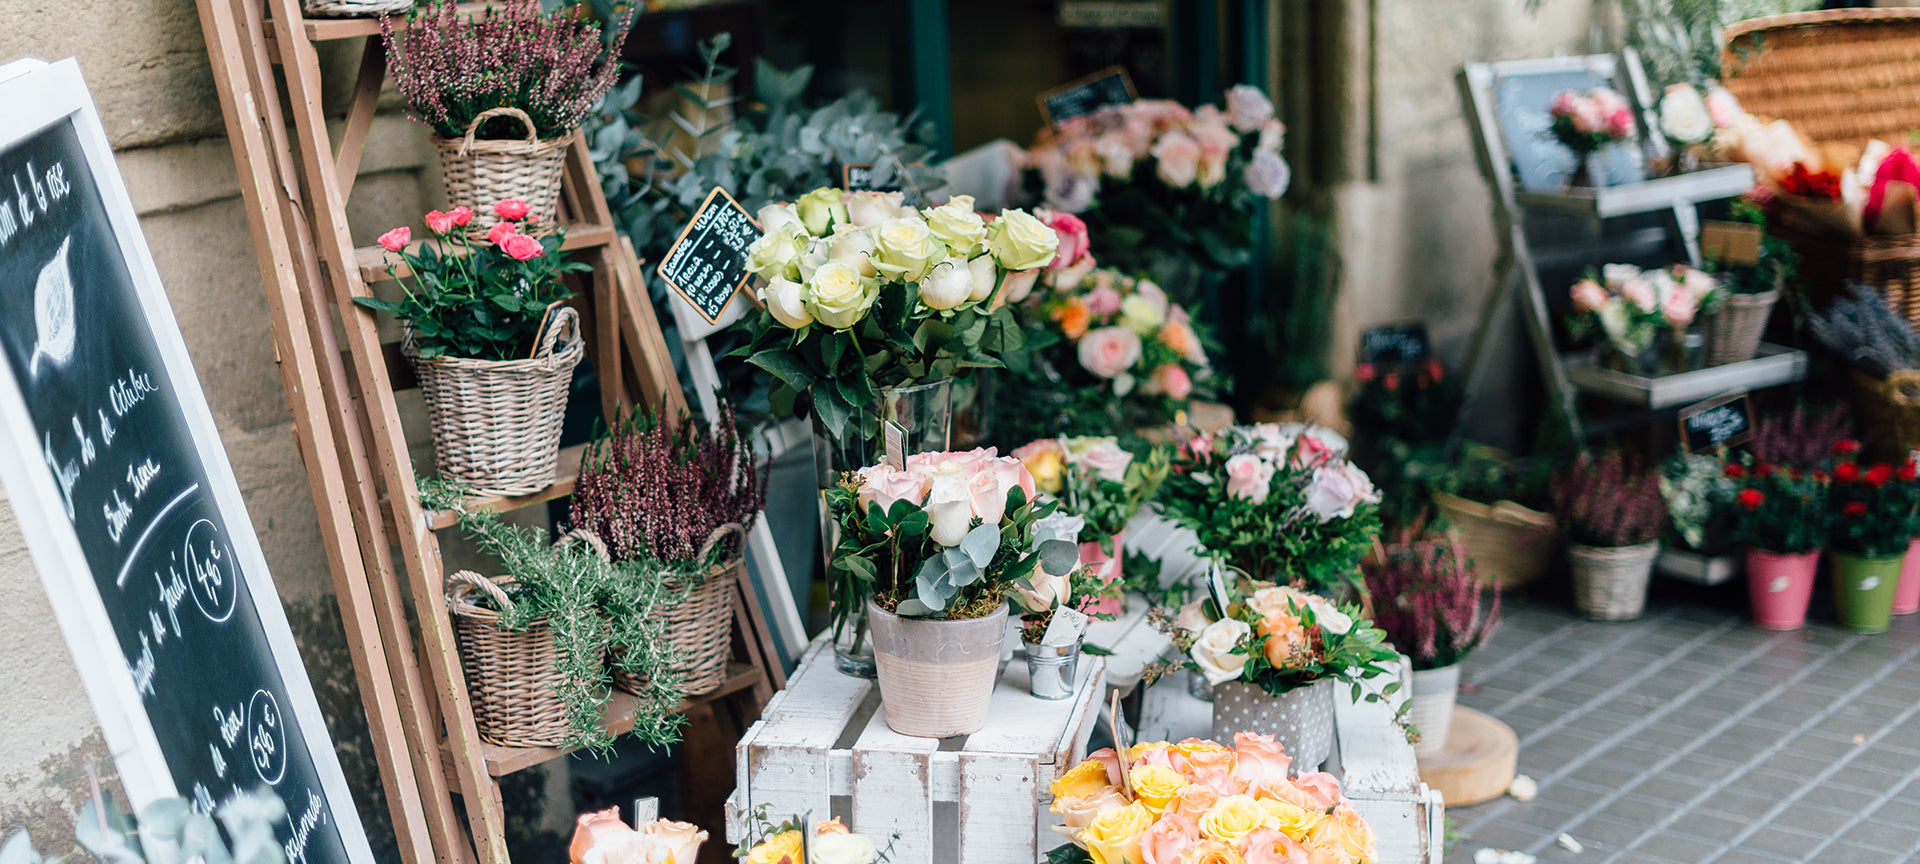 How to start a bouquet business